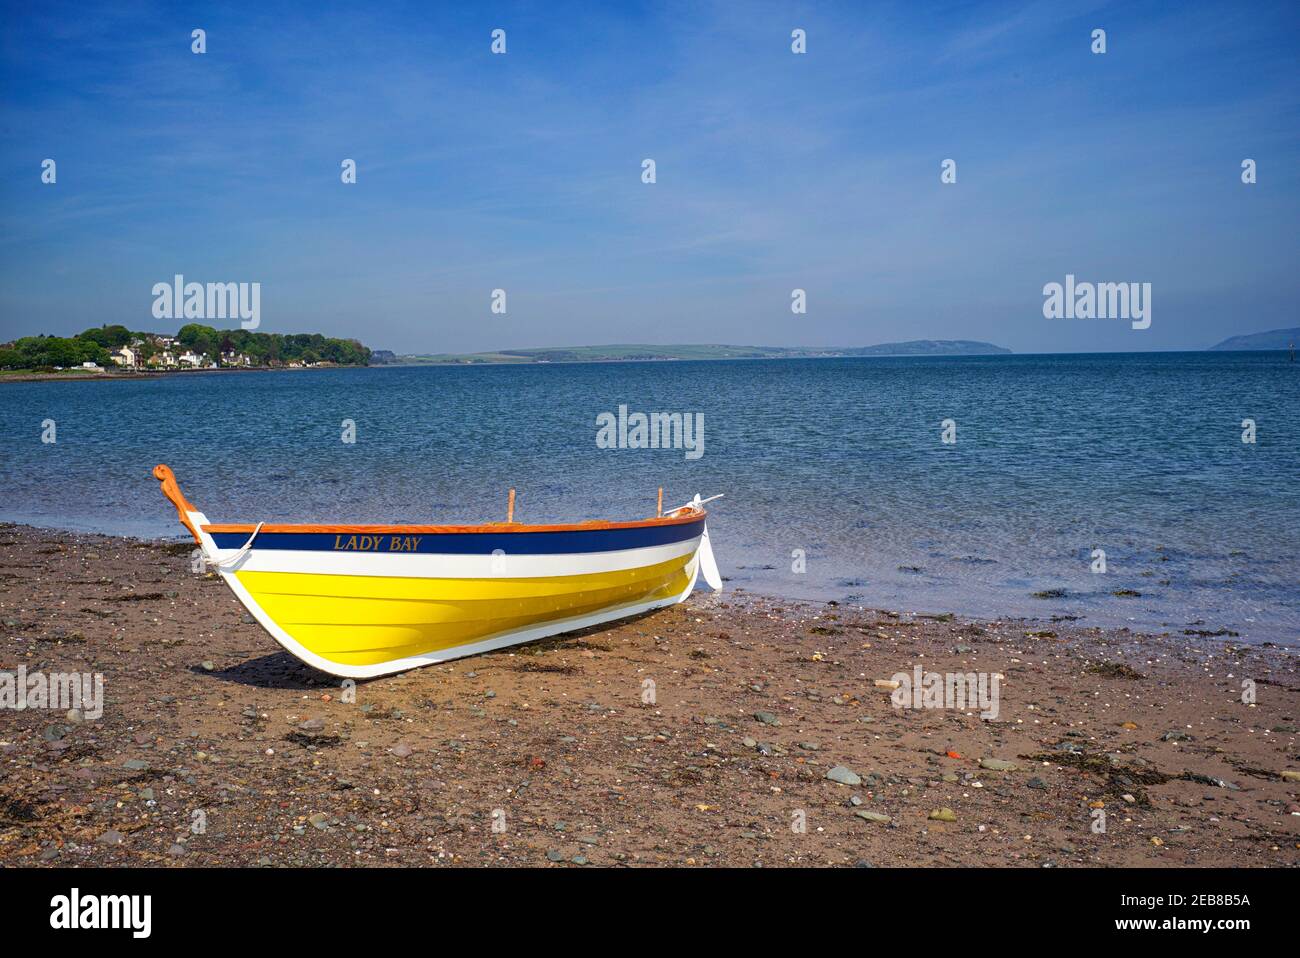 The Boat 'Lady Bay' on the beach at Loch Ryan Stranraer Dumfries and Galloway. Stock Photo